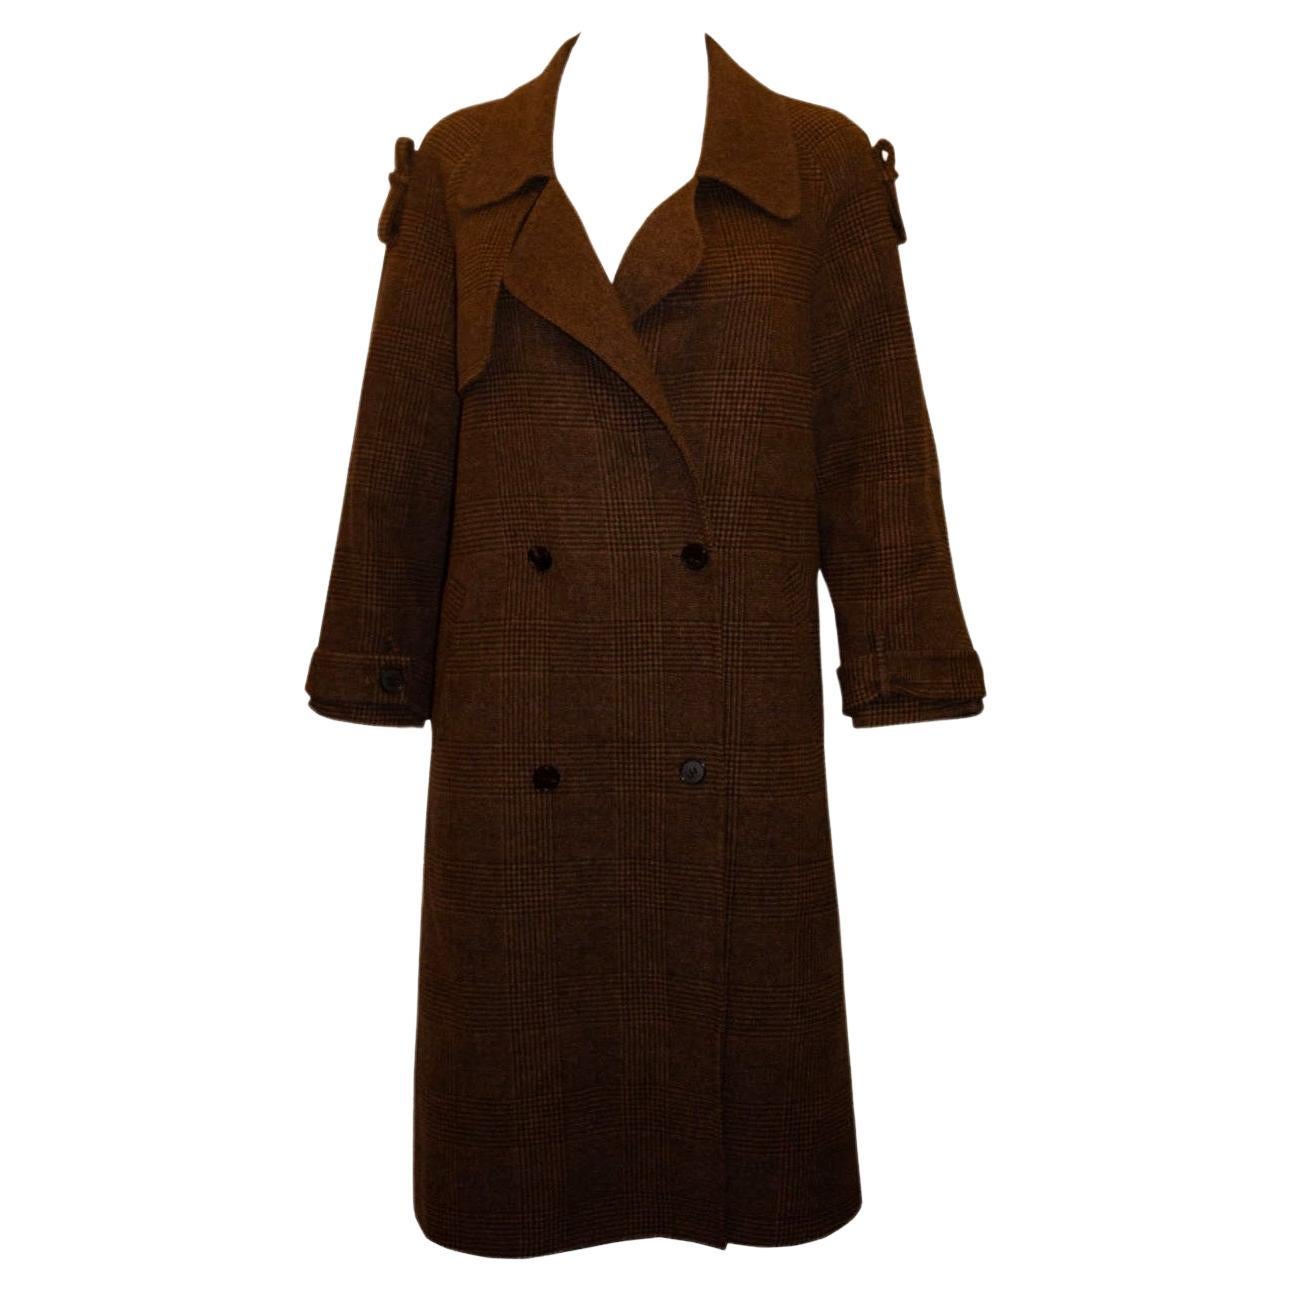 Brown Check Wool Coat by Zhenery For Sale